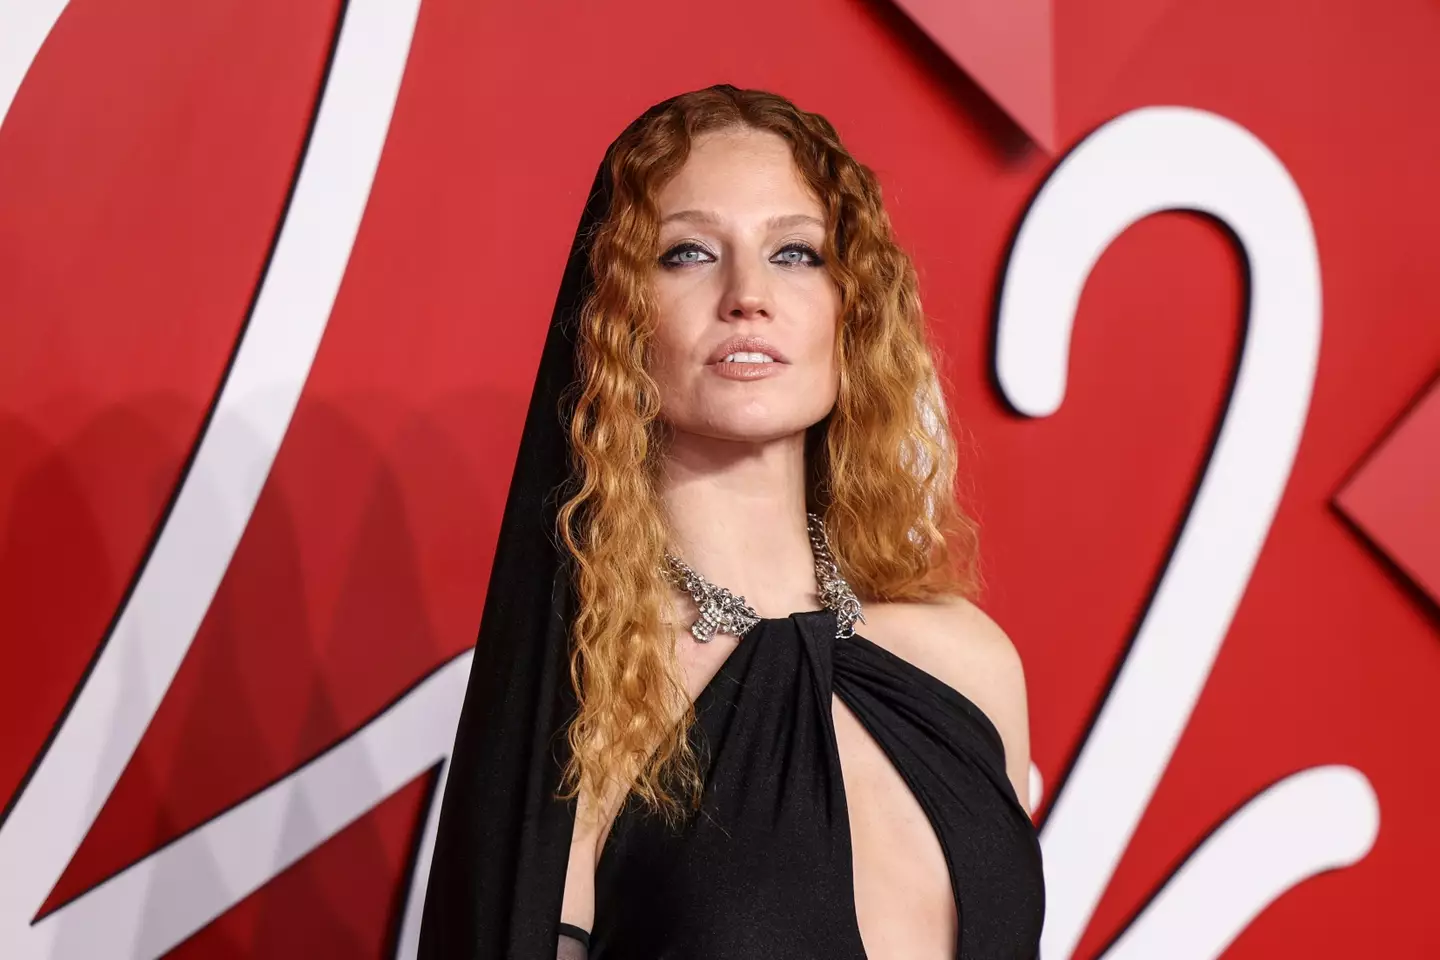 Jess Glynne has opened up about her song being overused on Jet2 flights.